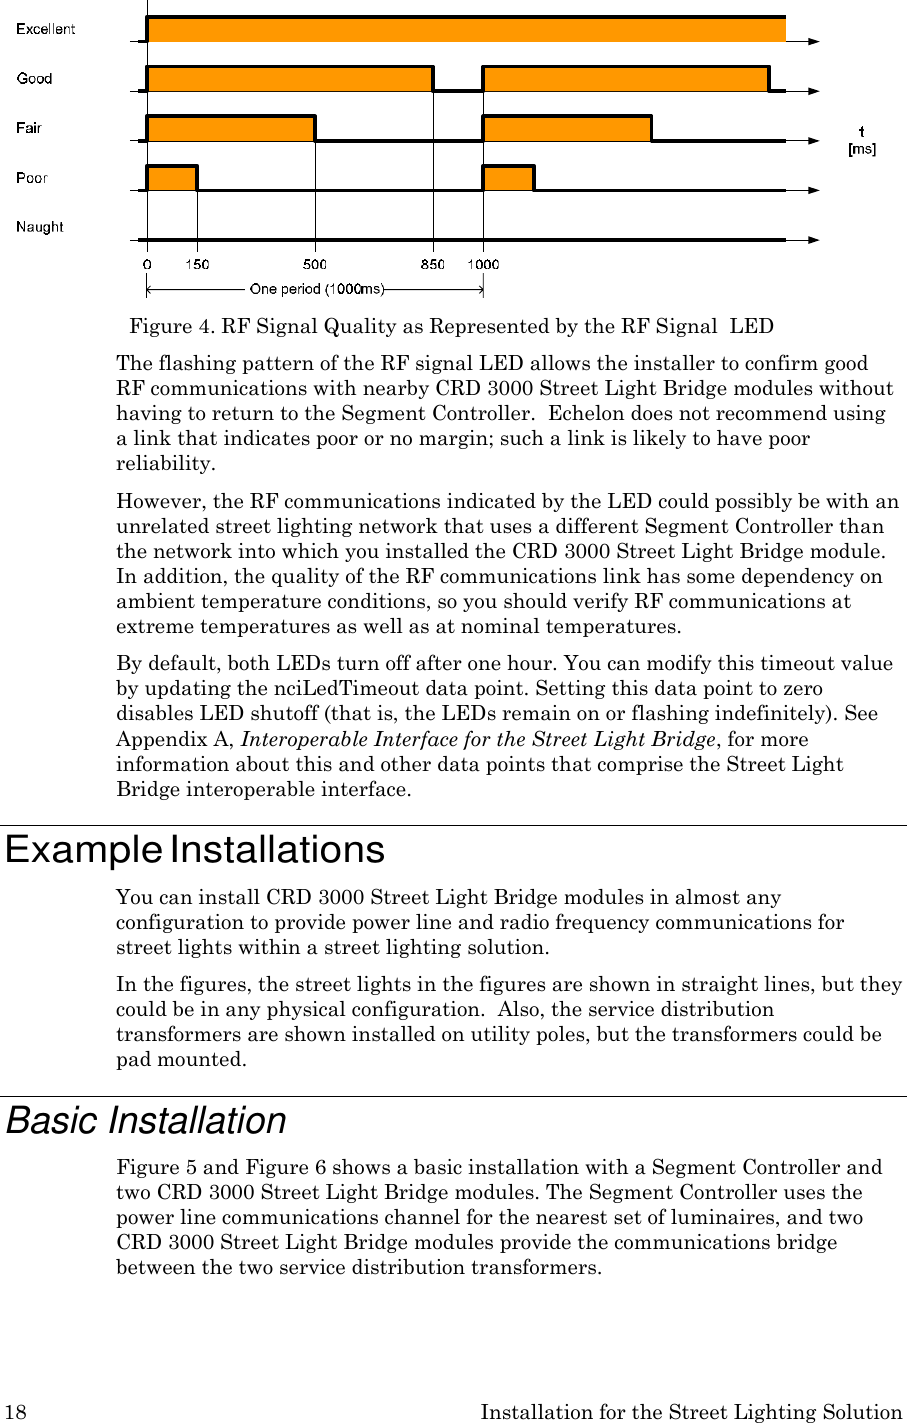 18 Installation for the Street Lighting Solution              Figure 4. RF Signal Quality as Represented by the RF Signal  LED The flashing pattern of the RF signal LED allows the installer to confirm good RF communications with nearby CRD 3000 Street Light Bridge modules without having to return to the Segment Controller.  Echelon does not recommend using a link that indicates poor or no margin; such a link is likely to have poor reliability. However, the RF communications indicated by the LED could possibly be with an unrelated street lighting network that uses a different Segment Controller than the network into which you installed the CRD 3000 Street Light Bridge module. In addition, the quality of the RF communications link has some dependency on ambient temperature conditions, so you should verify RF communications at extreme temperatures as well as at nominal temperatures. By default, both LEDs turn off after one hour. You can modify this timeout value by updating the nciLedTimeout data point. Setting this data point to zero disables LED shutoff (that is, the LEDs remain on or flashing indefinitely). See Appendix A, Interoperable Interface for the Street Light Bridge, for more information about this and other data points that comprise the Street Light Bridge interoperable interface.  Example Installations You can install CRD 3000 Street Light Bridge modules in almost any configuration to provide power line and radio frequency communications for street lights within a street lighting solution. In the figures, the street lights in the figures are shown in straight lines, but they could be in any physical configuration.  Also, the service distribution transformers are shown installed on utility poles, but the transformers could be pad mounted.  Basic Installation Figure 5 and Figure 6 shows a basic installation with a Segment Controller and two CRD 3000 Street Light Bridge modules. The Segment Controller uses the power line communications channel for the nearest set of luminaires, and two CRD 3000 Street Light Bridge modules provide the communications bridge between the two service distribution transformers. 